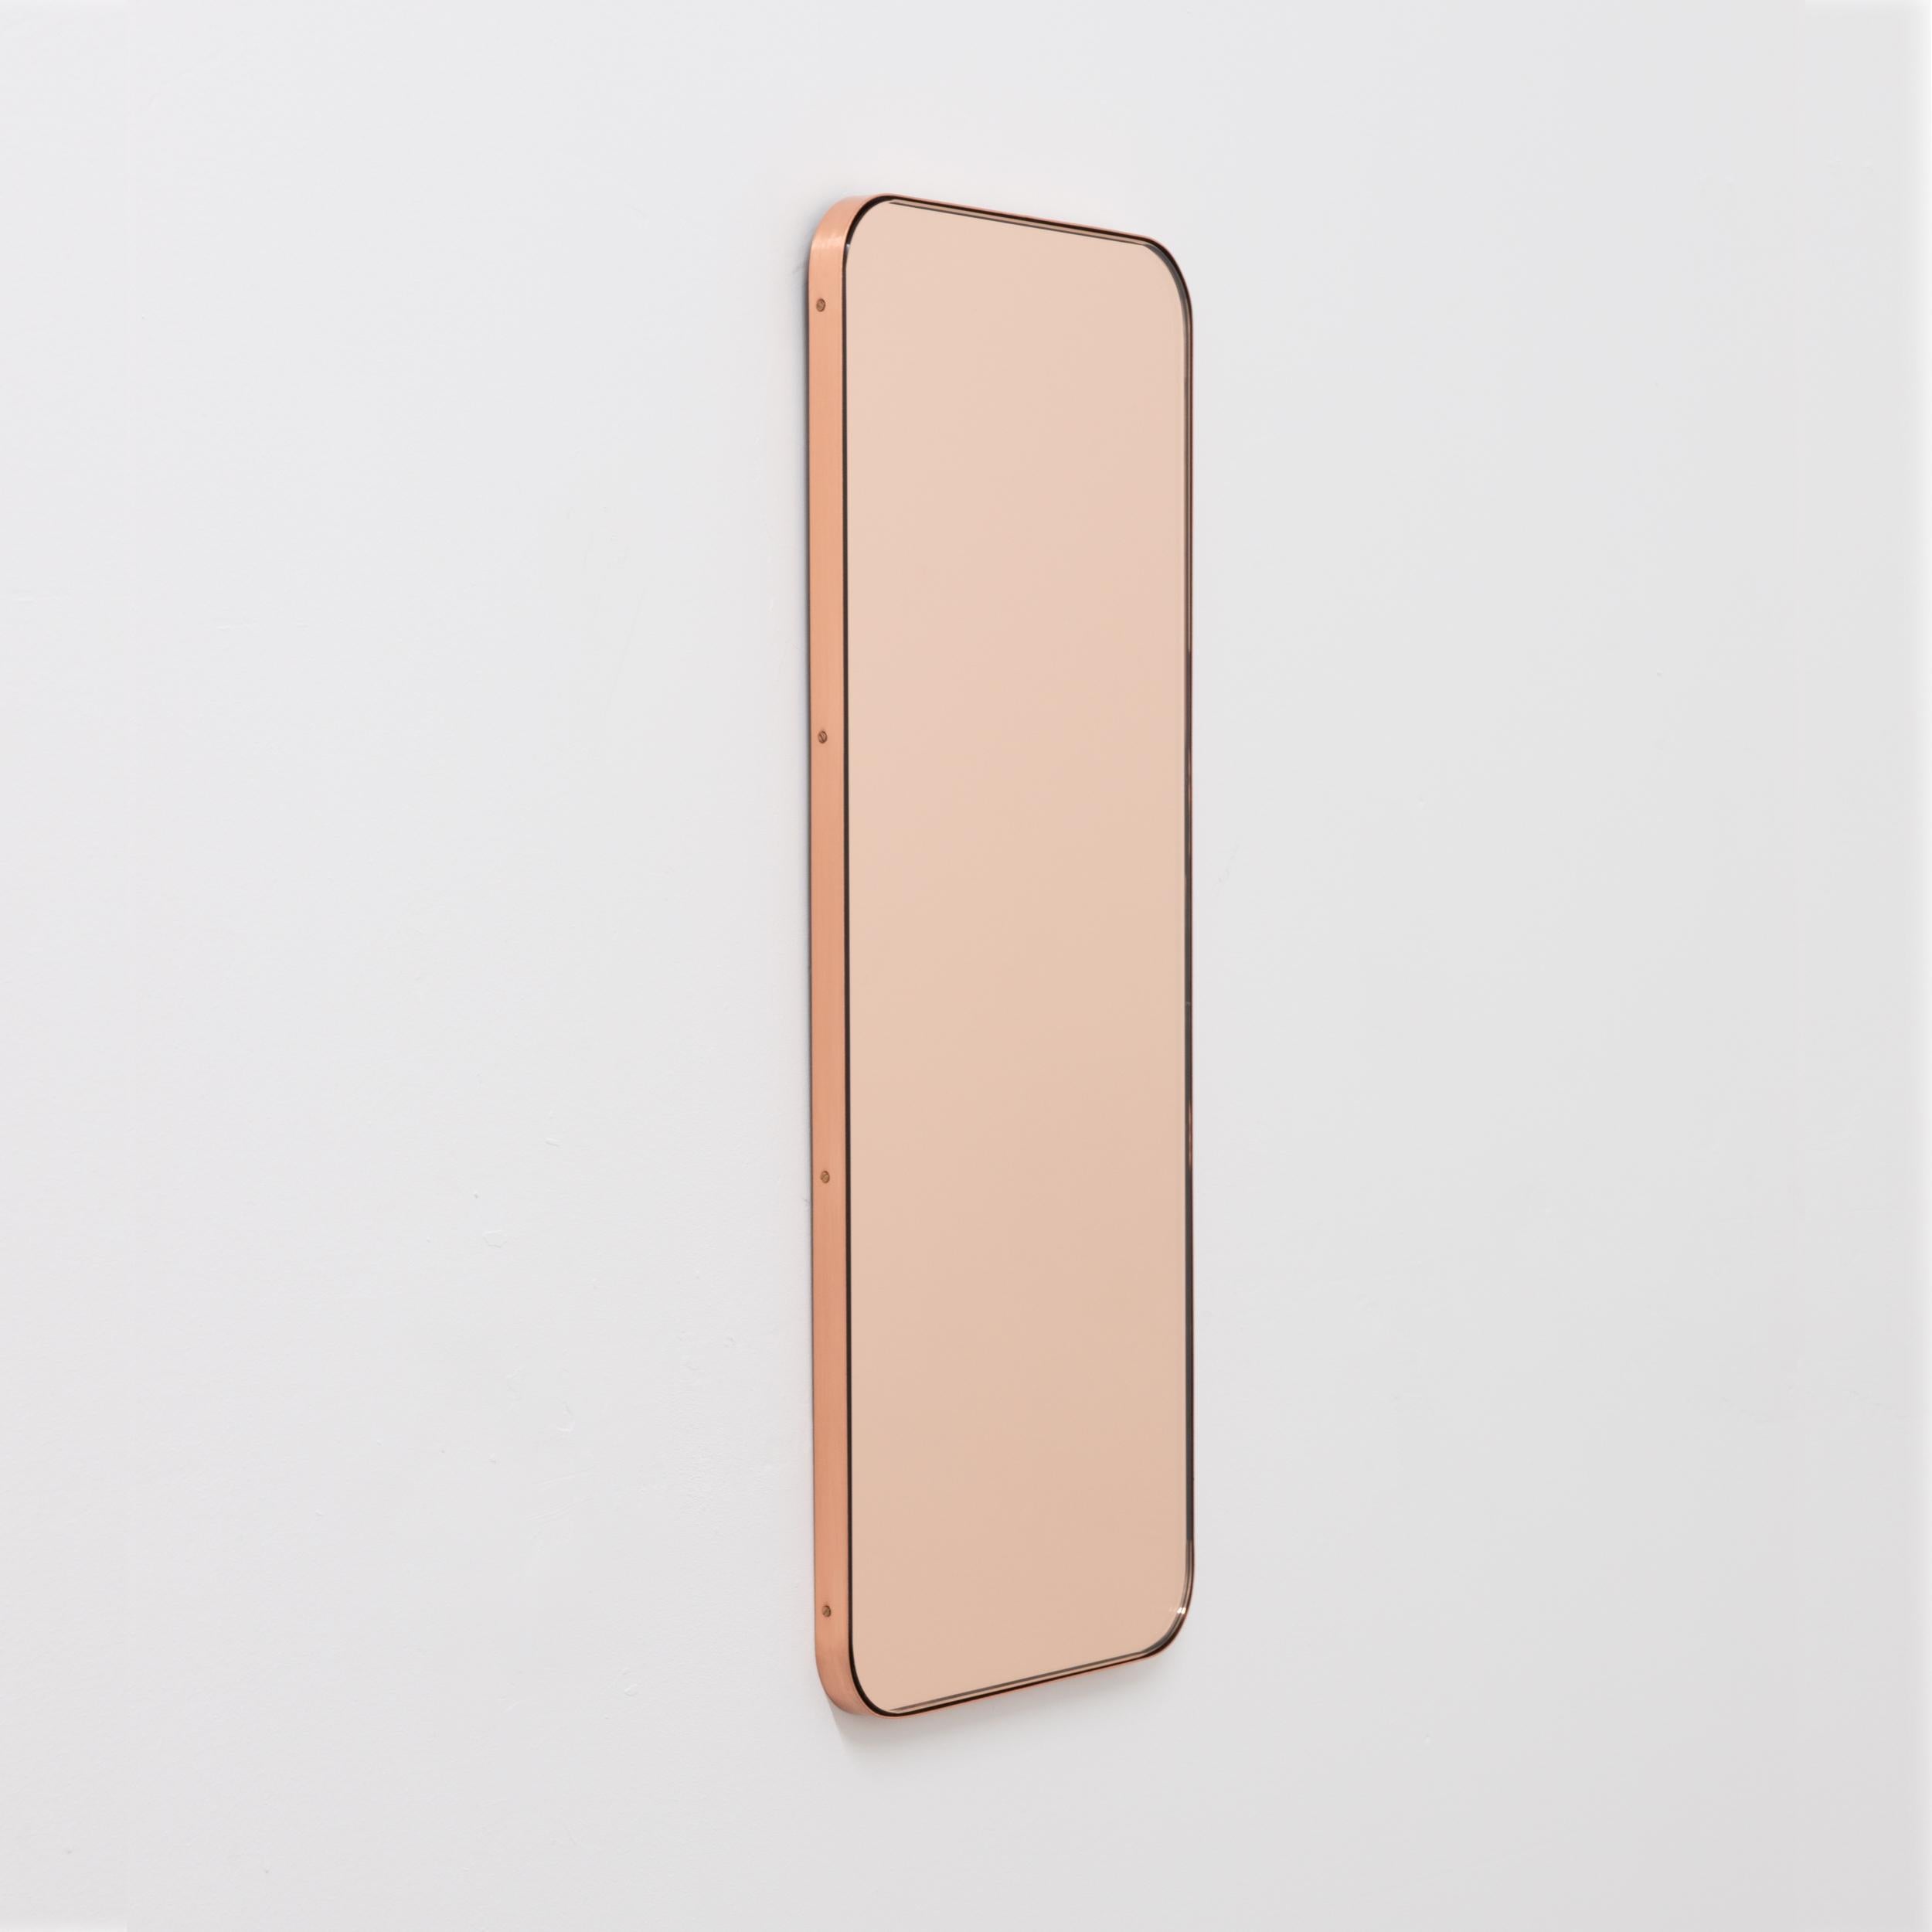 Quadris Rectangular Rose Gold Contemporary Mirror with Copper Frame, XL In New Condition For Sale In London, GB